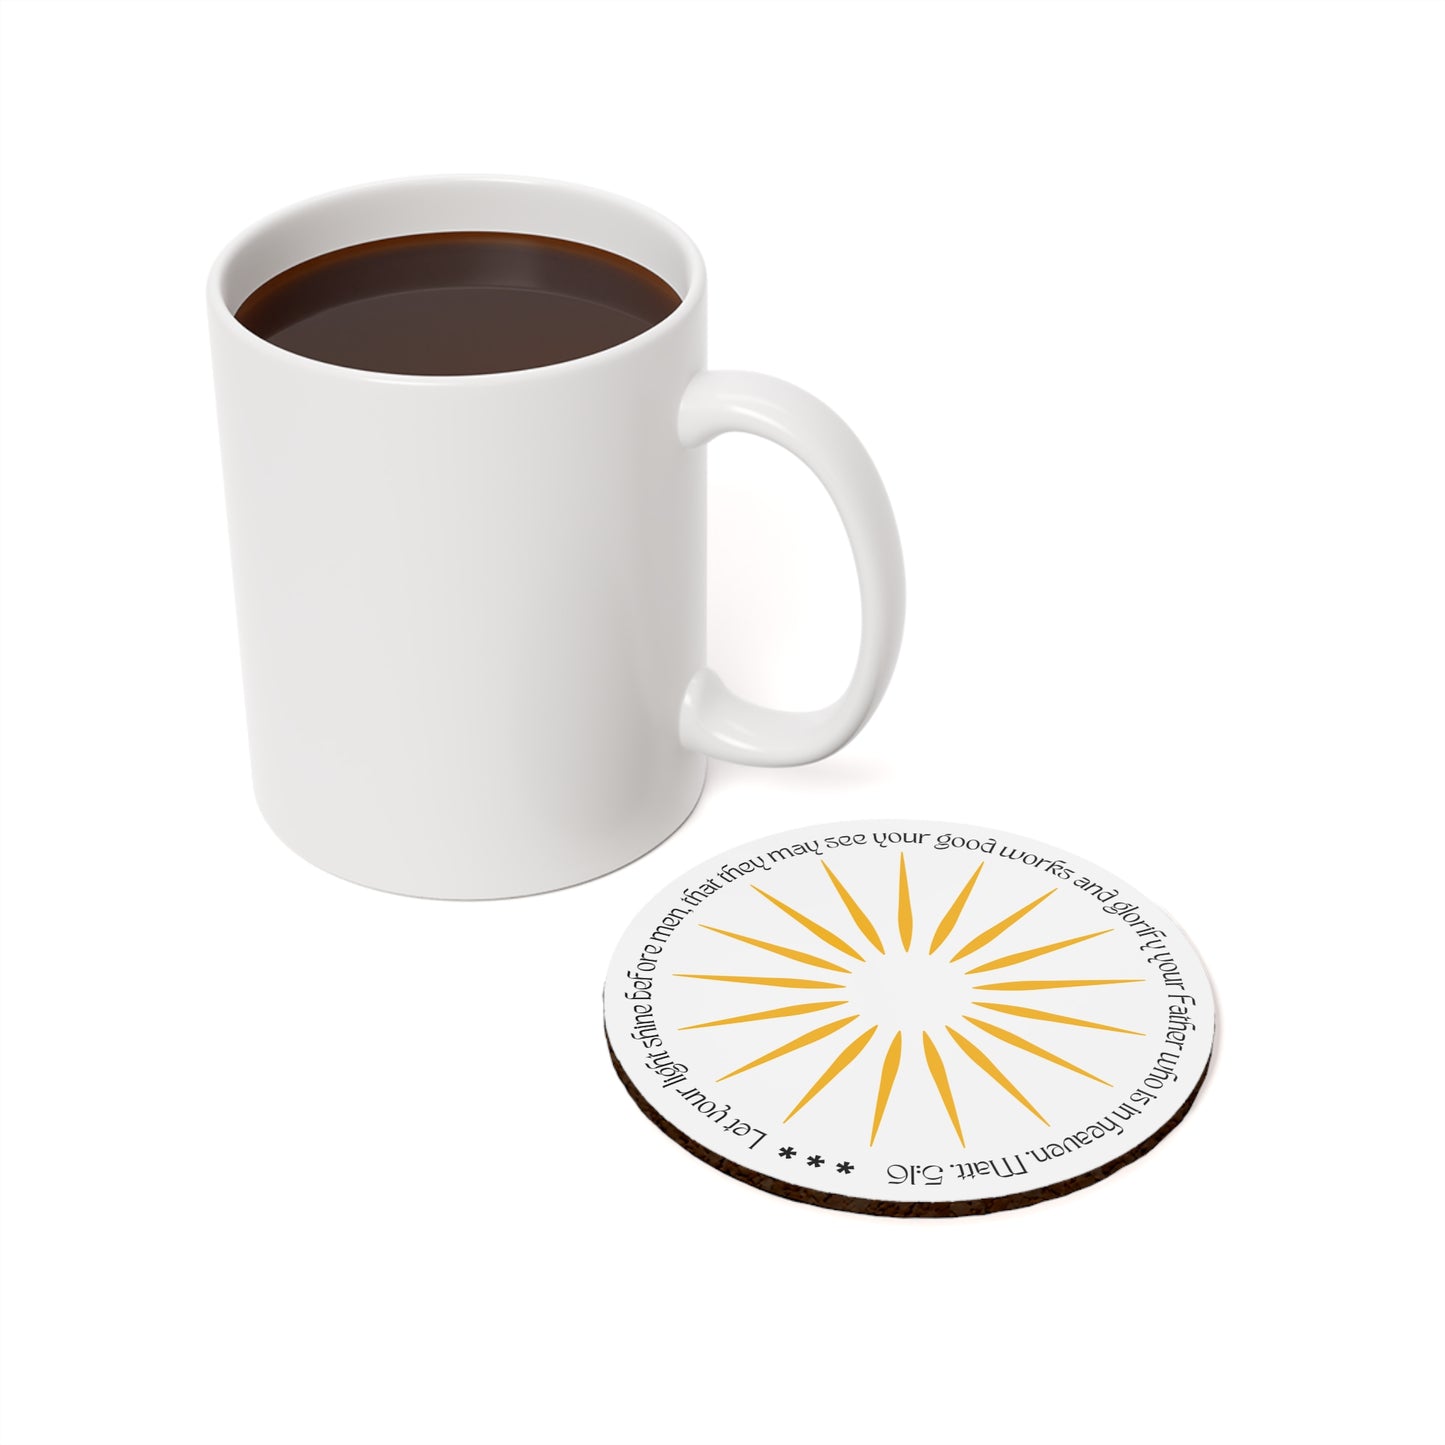 Coaster for Candles, Mugs, Glasses, Let Your Light Shine